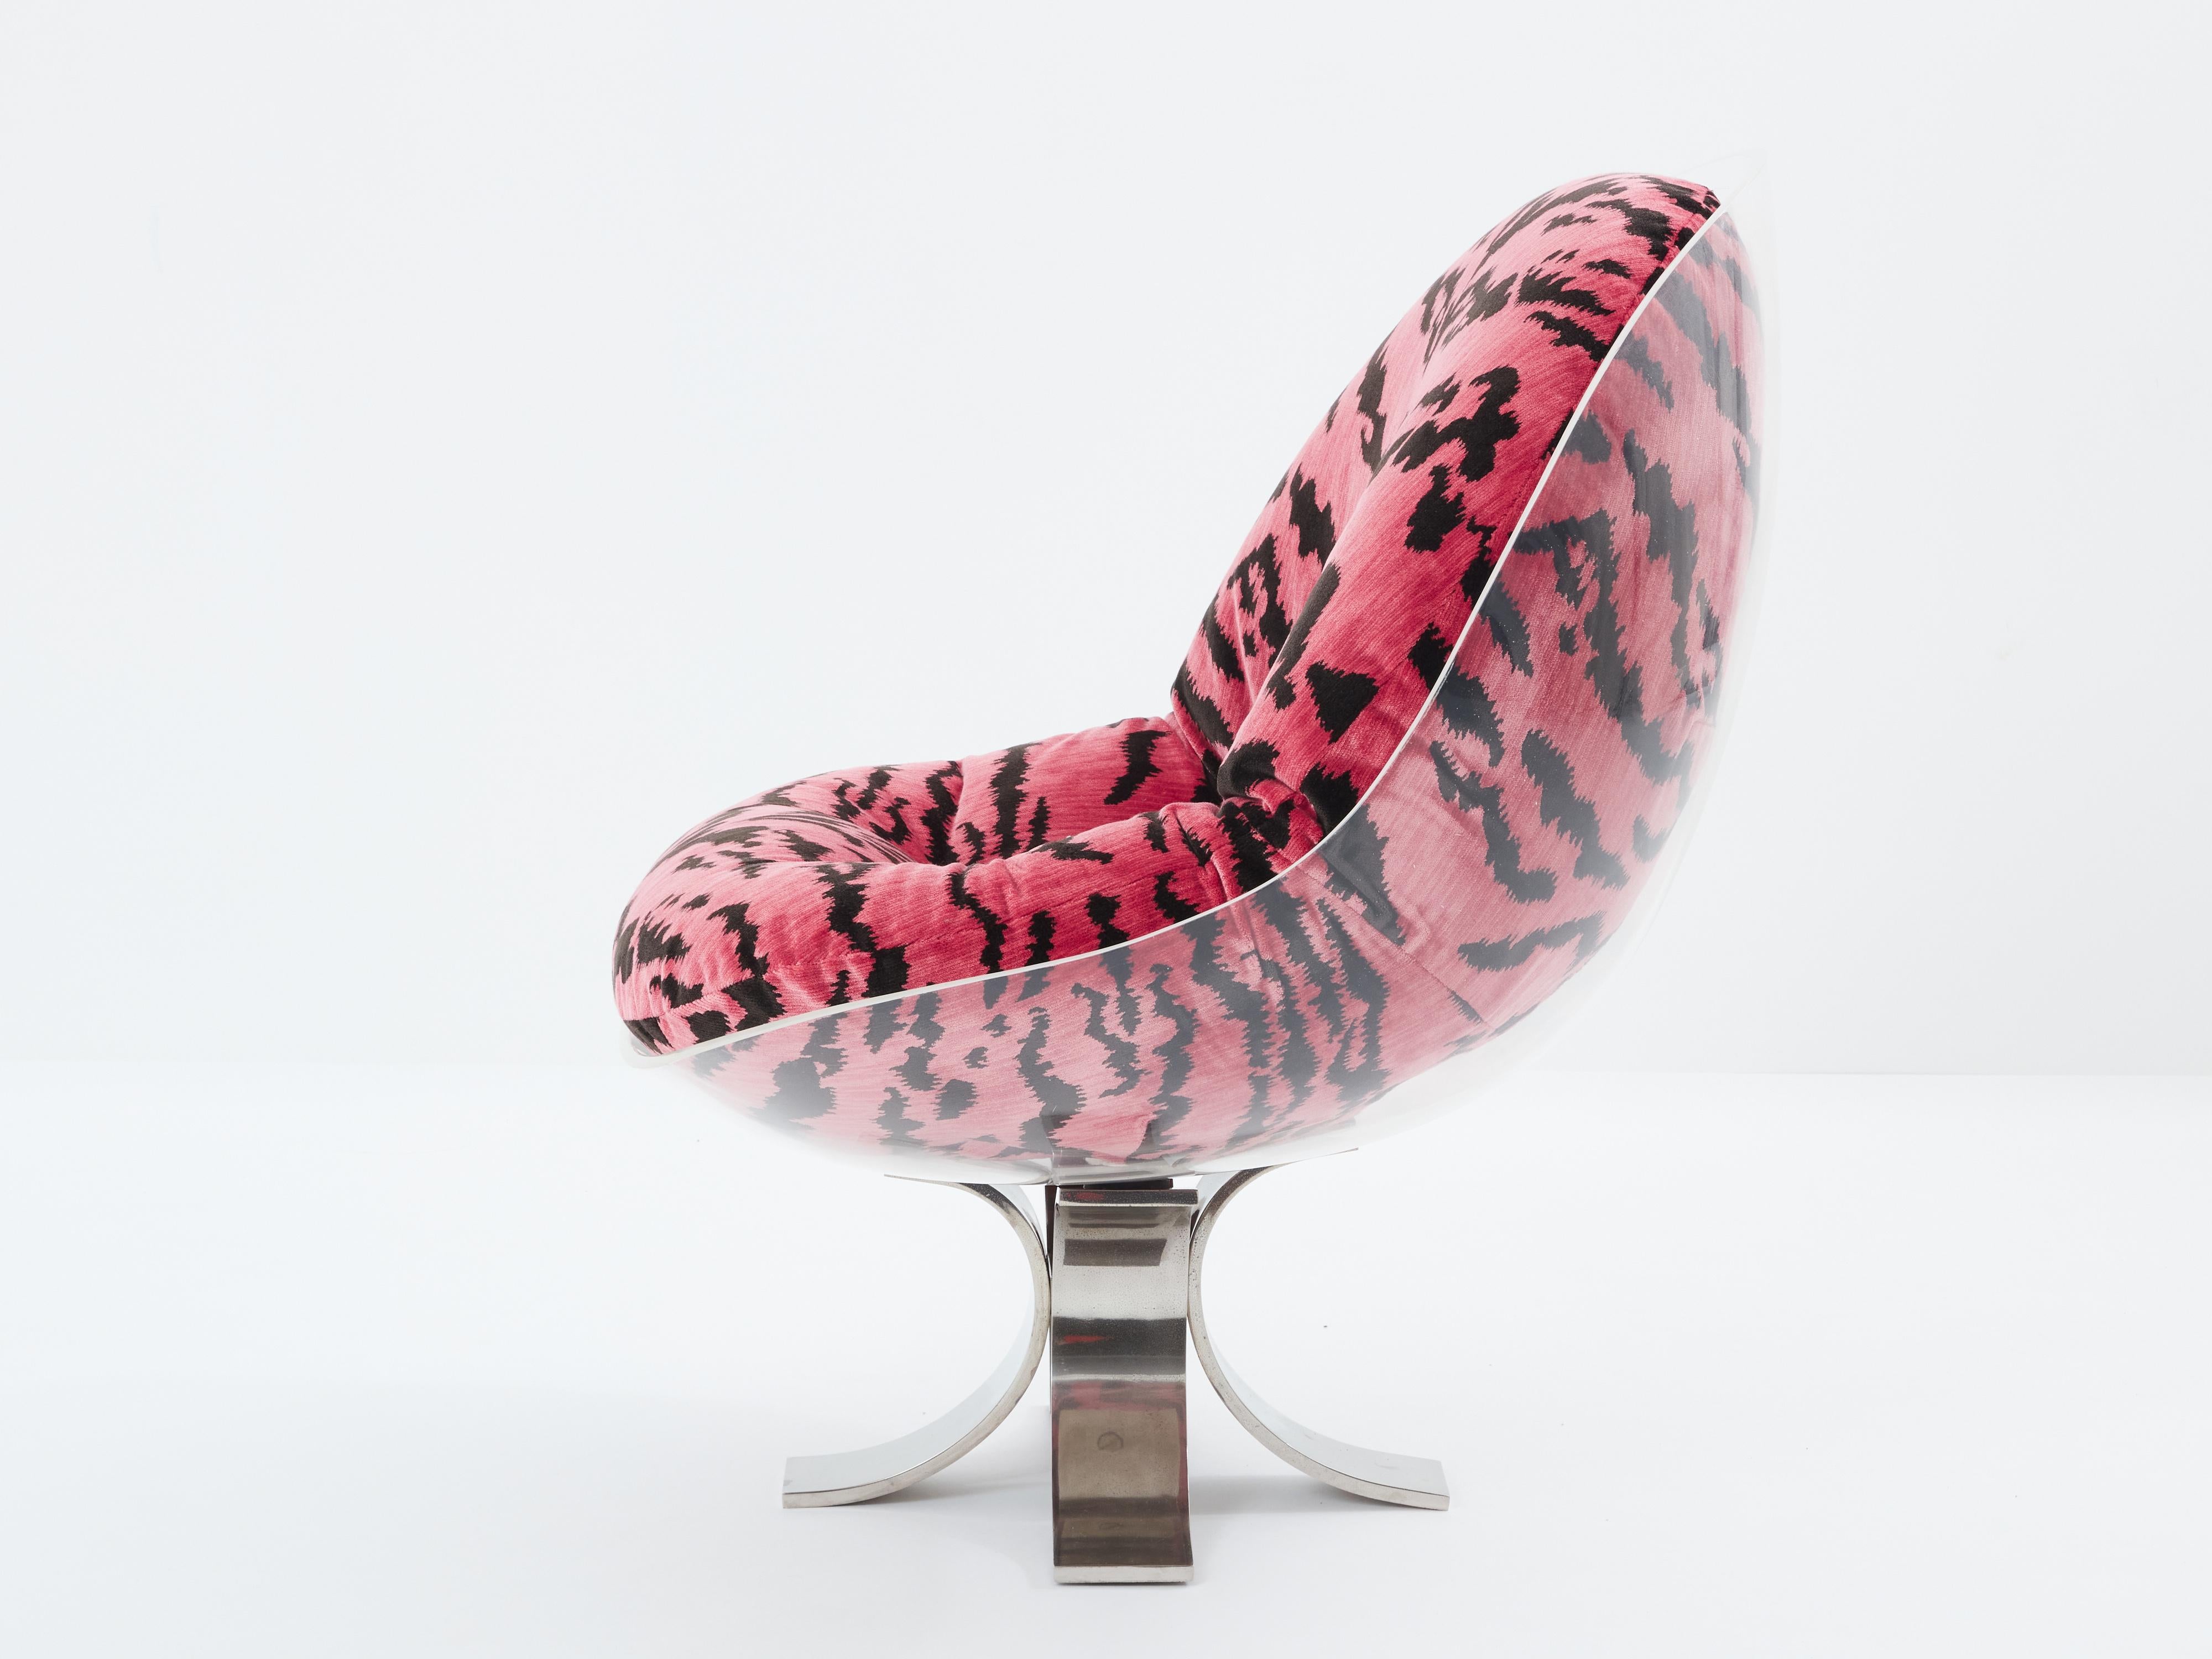 This rare and distinctive egg chair is a creation by Michel Pigneres, dating back to 1972. It is crafted with a transparent altuglas shell, mounted on curved steel blades, attached together by four big flat screws. Its cushion has been reupholstered